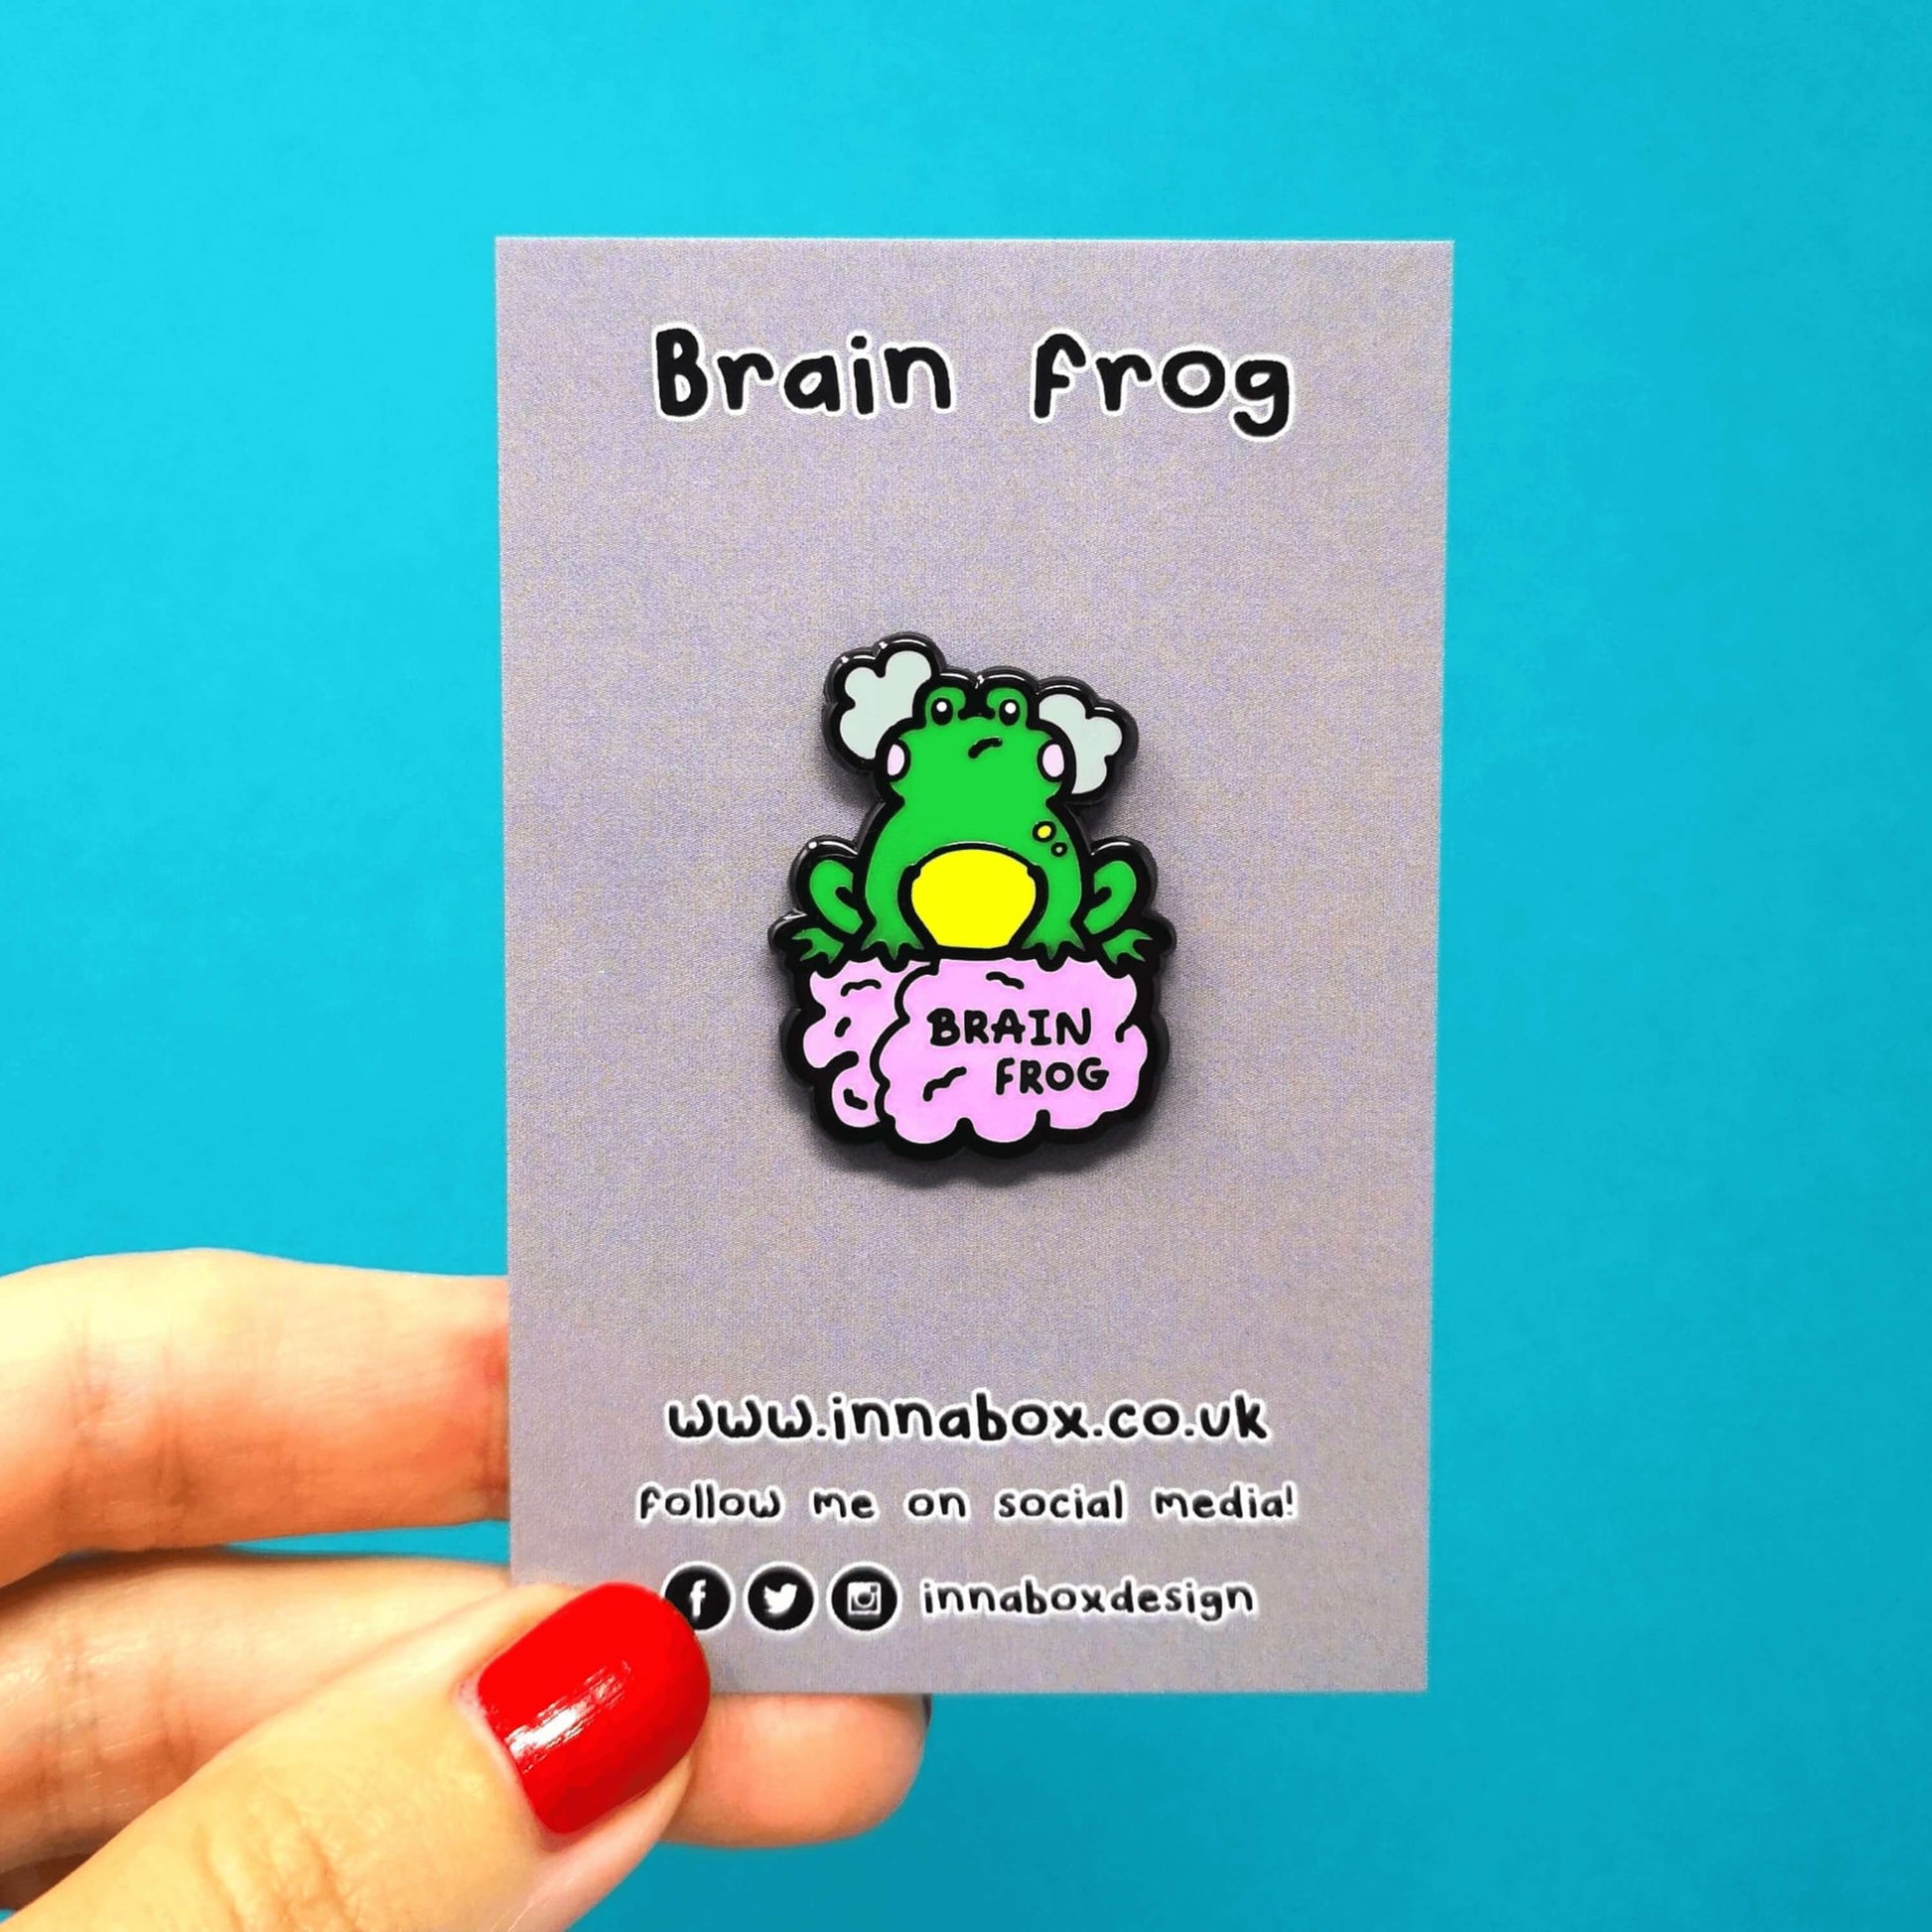 The Brain Frog Enamel Pin - Brain Fog on a grey backing card with the product name above and the innabox social media handles at the bottom, it is being held over a blue background. The pin is of a green frog with pink blush cheeks looking confused with two grey clouds by its head, it is sat on a pink brain with the text reading Brain Frog. The design is raising awareness for brain fog.